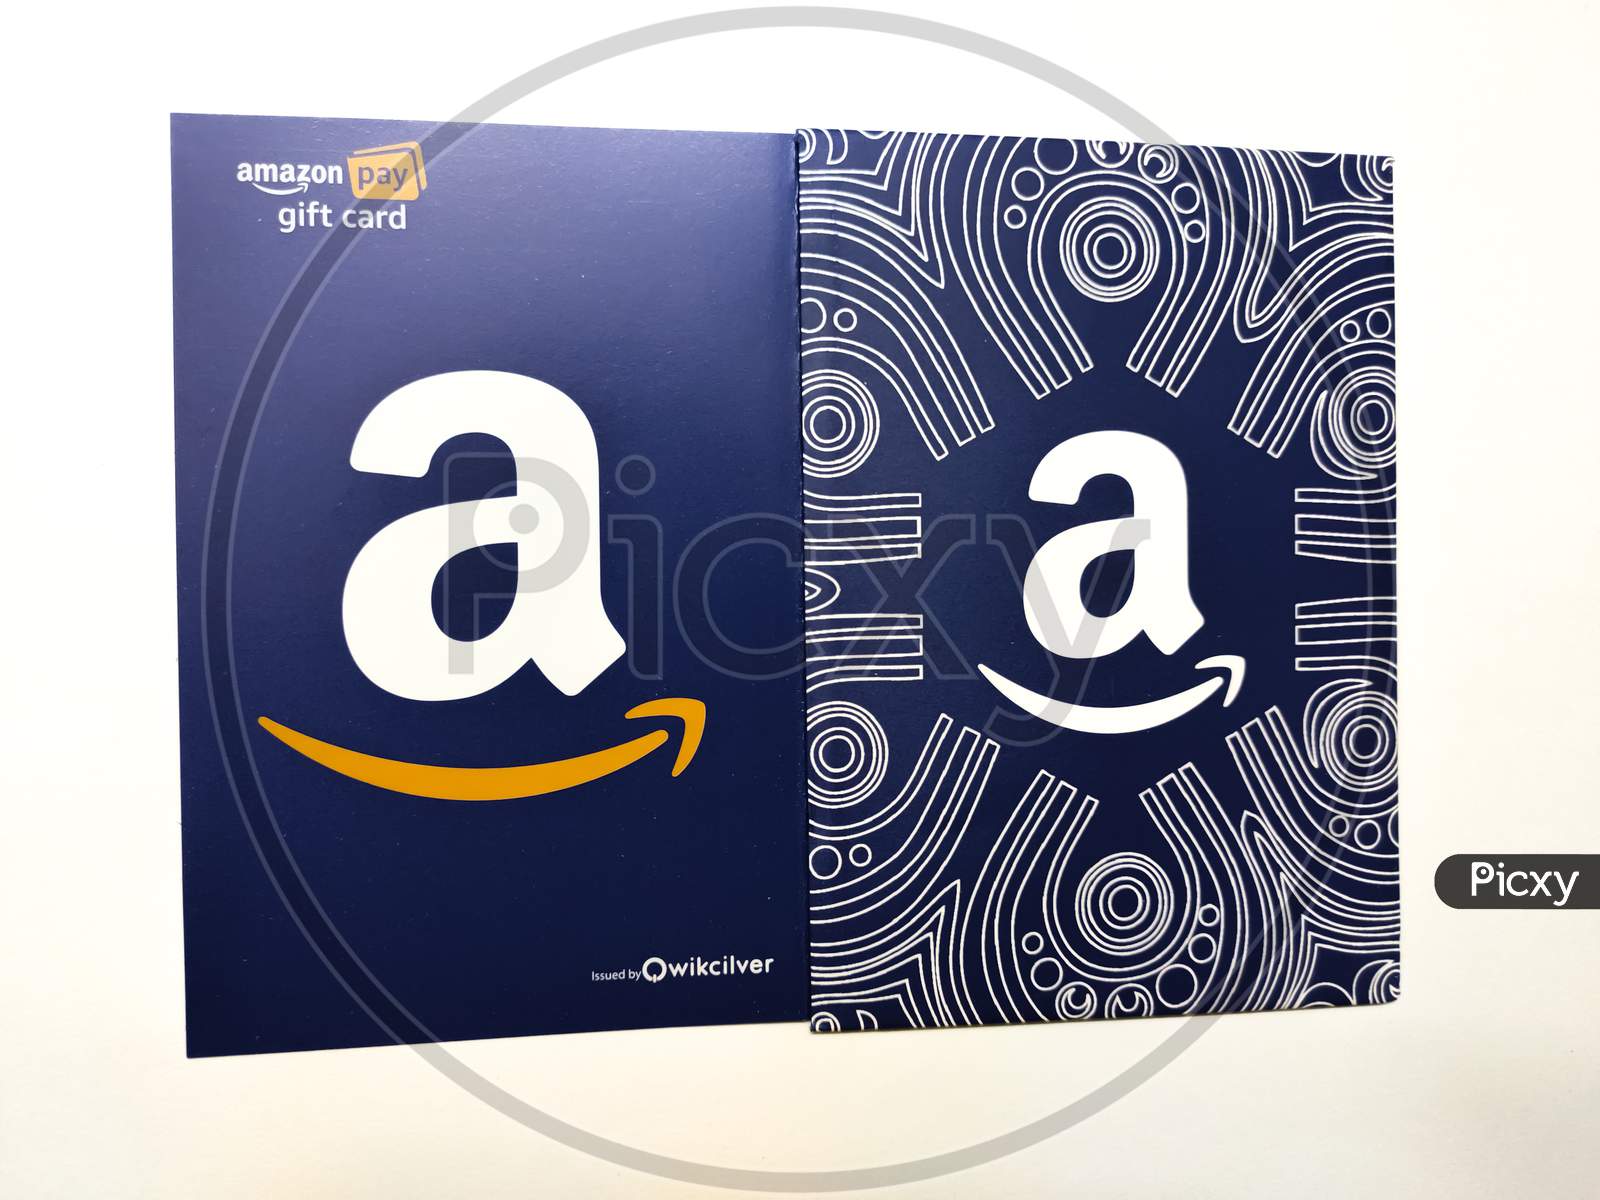 Amazon gift card isolated on white background with space for text, which allows the recipient to purchase items from the Amazon.com website